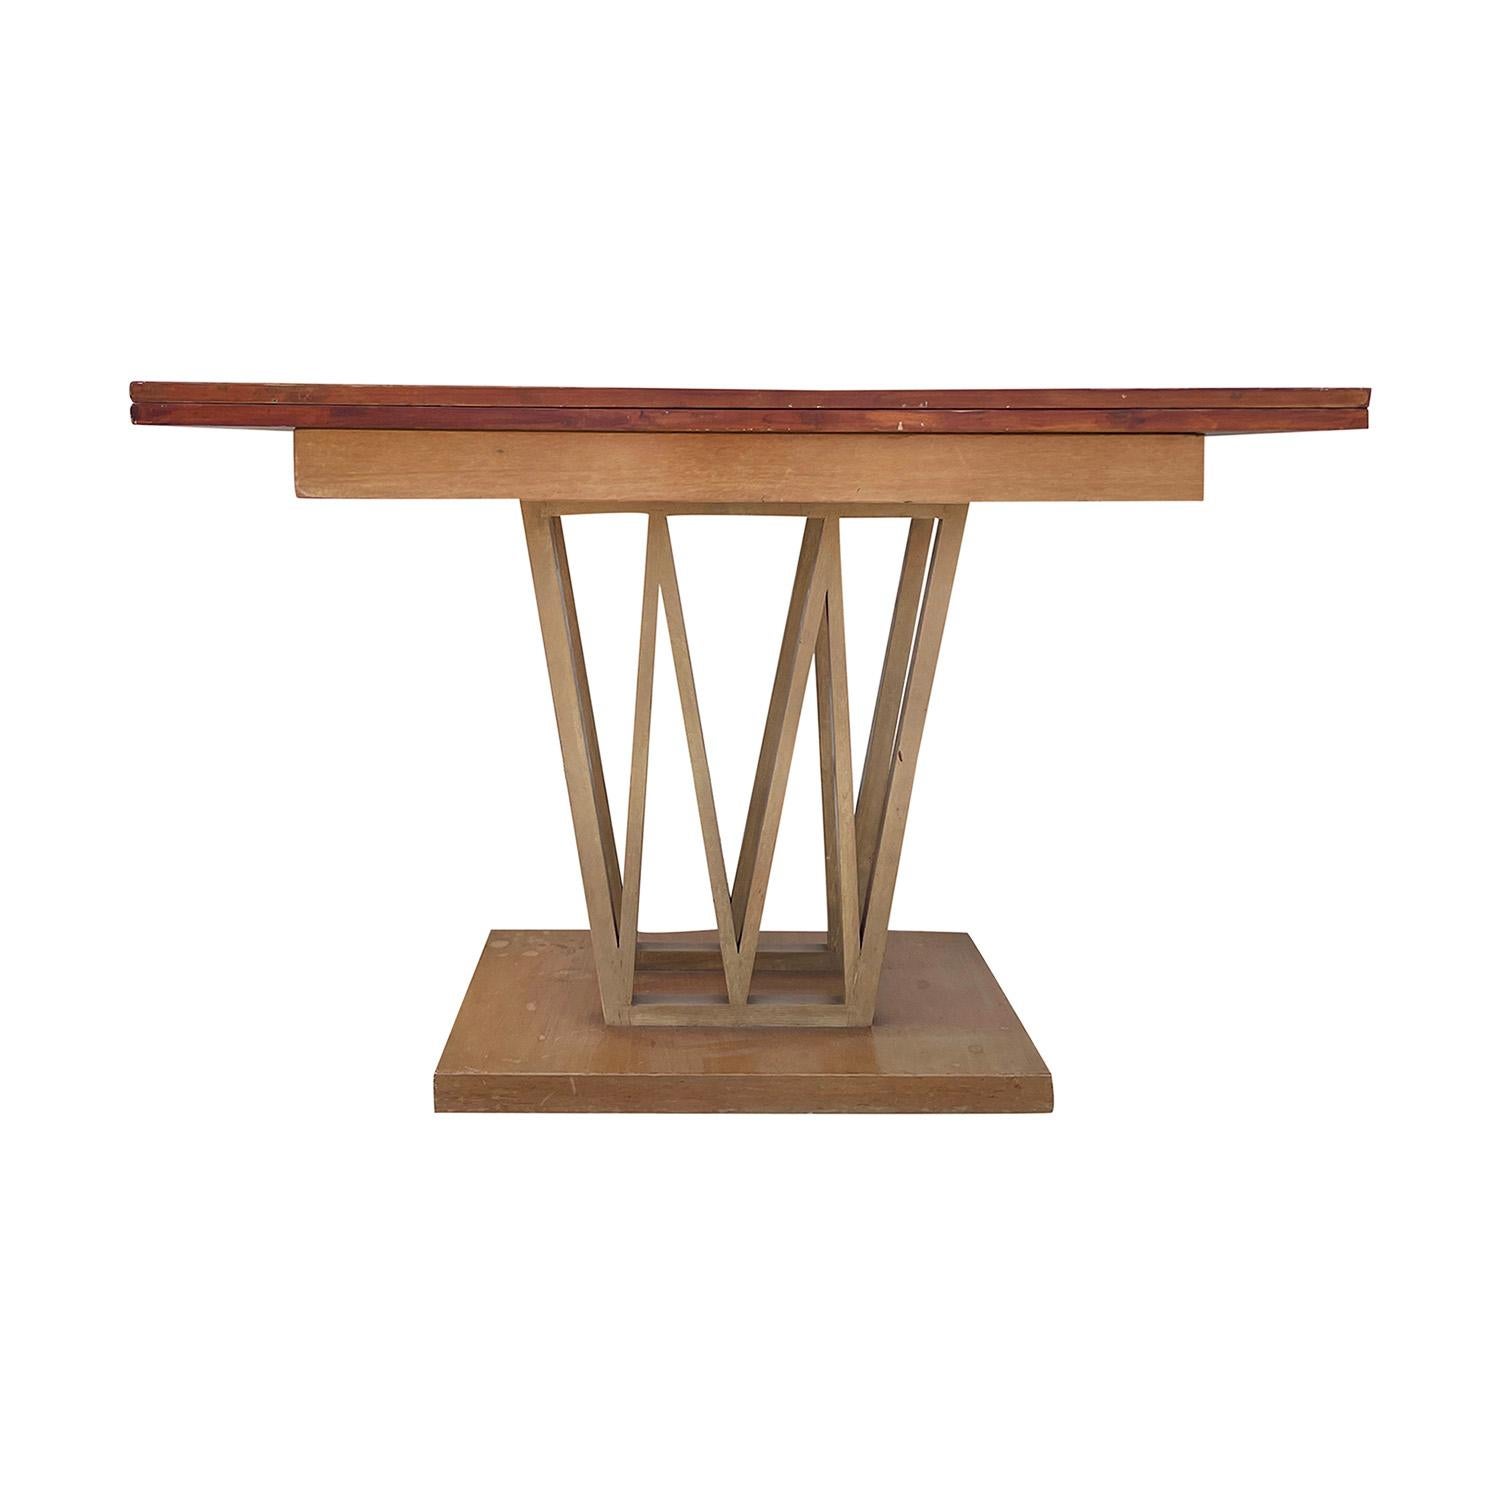 A small, vintage Mid-Century Modern Danish drop leaf dining table made of hand crafted polished Walnut, in good condition. The light-brown folding top was designed by an unknown carpenter from Copenhagen. The end table is standing on sculptural